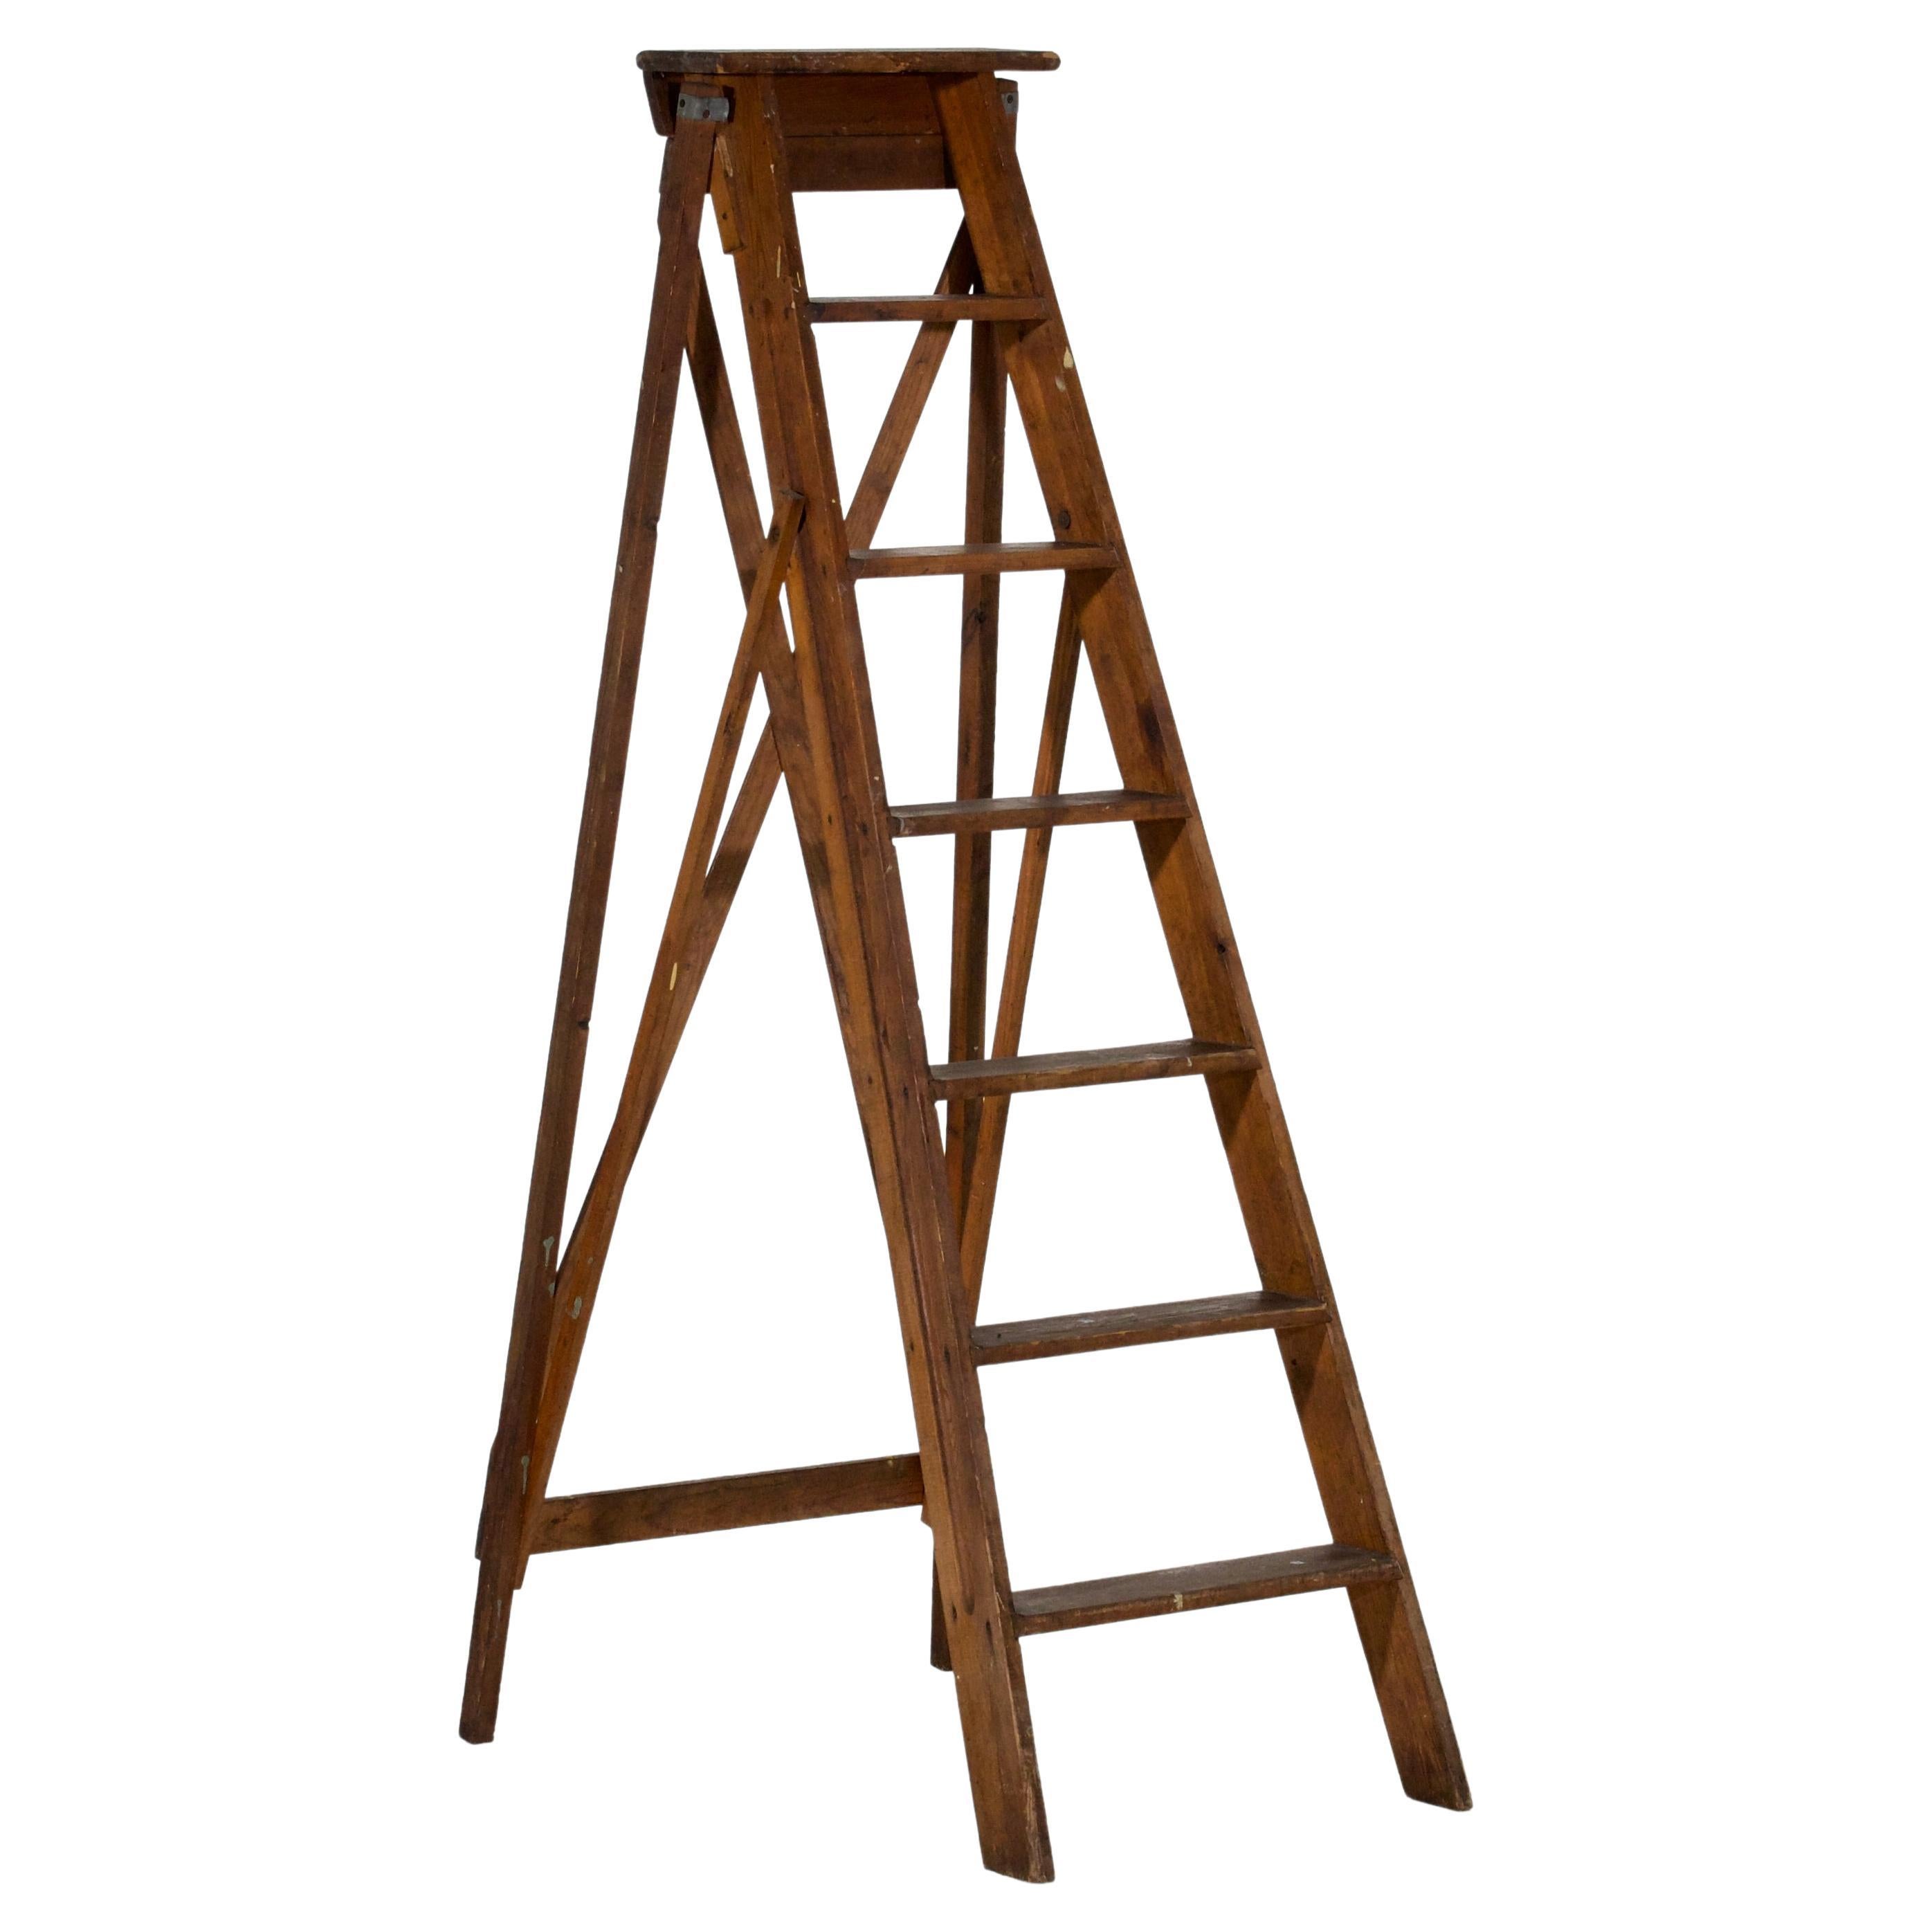 Swedish library ladder was created in the 19th C.